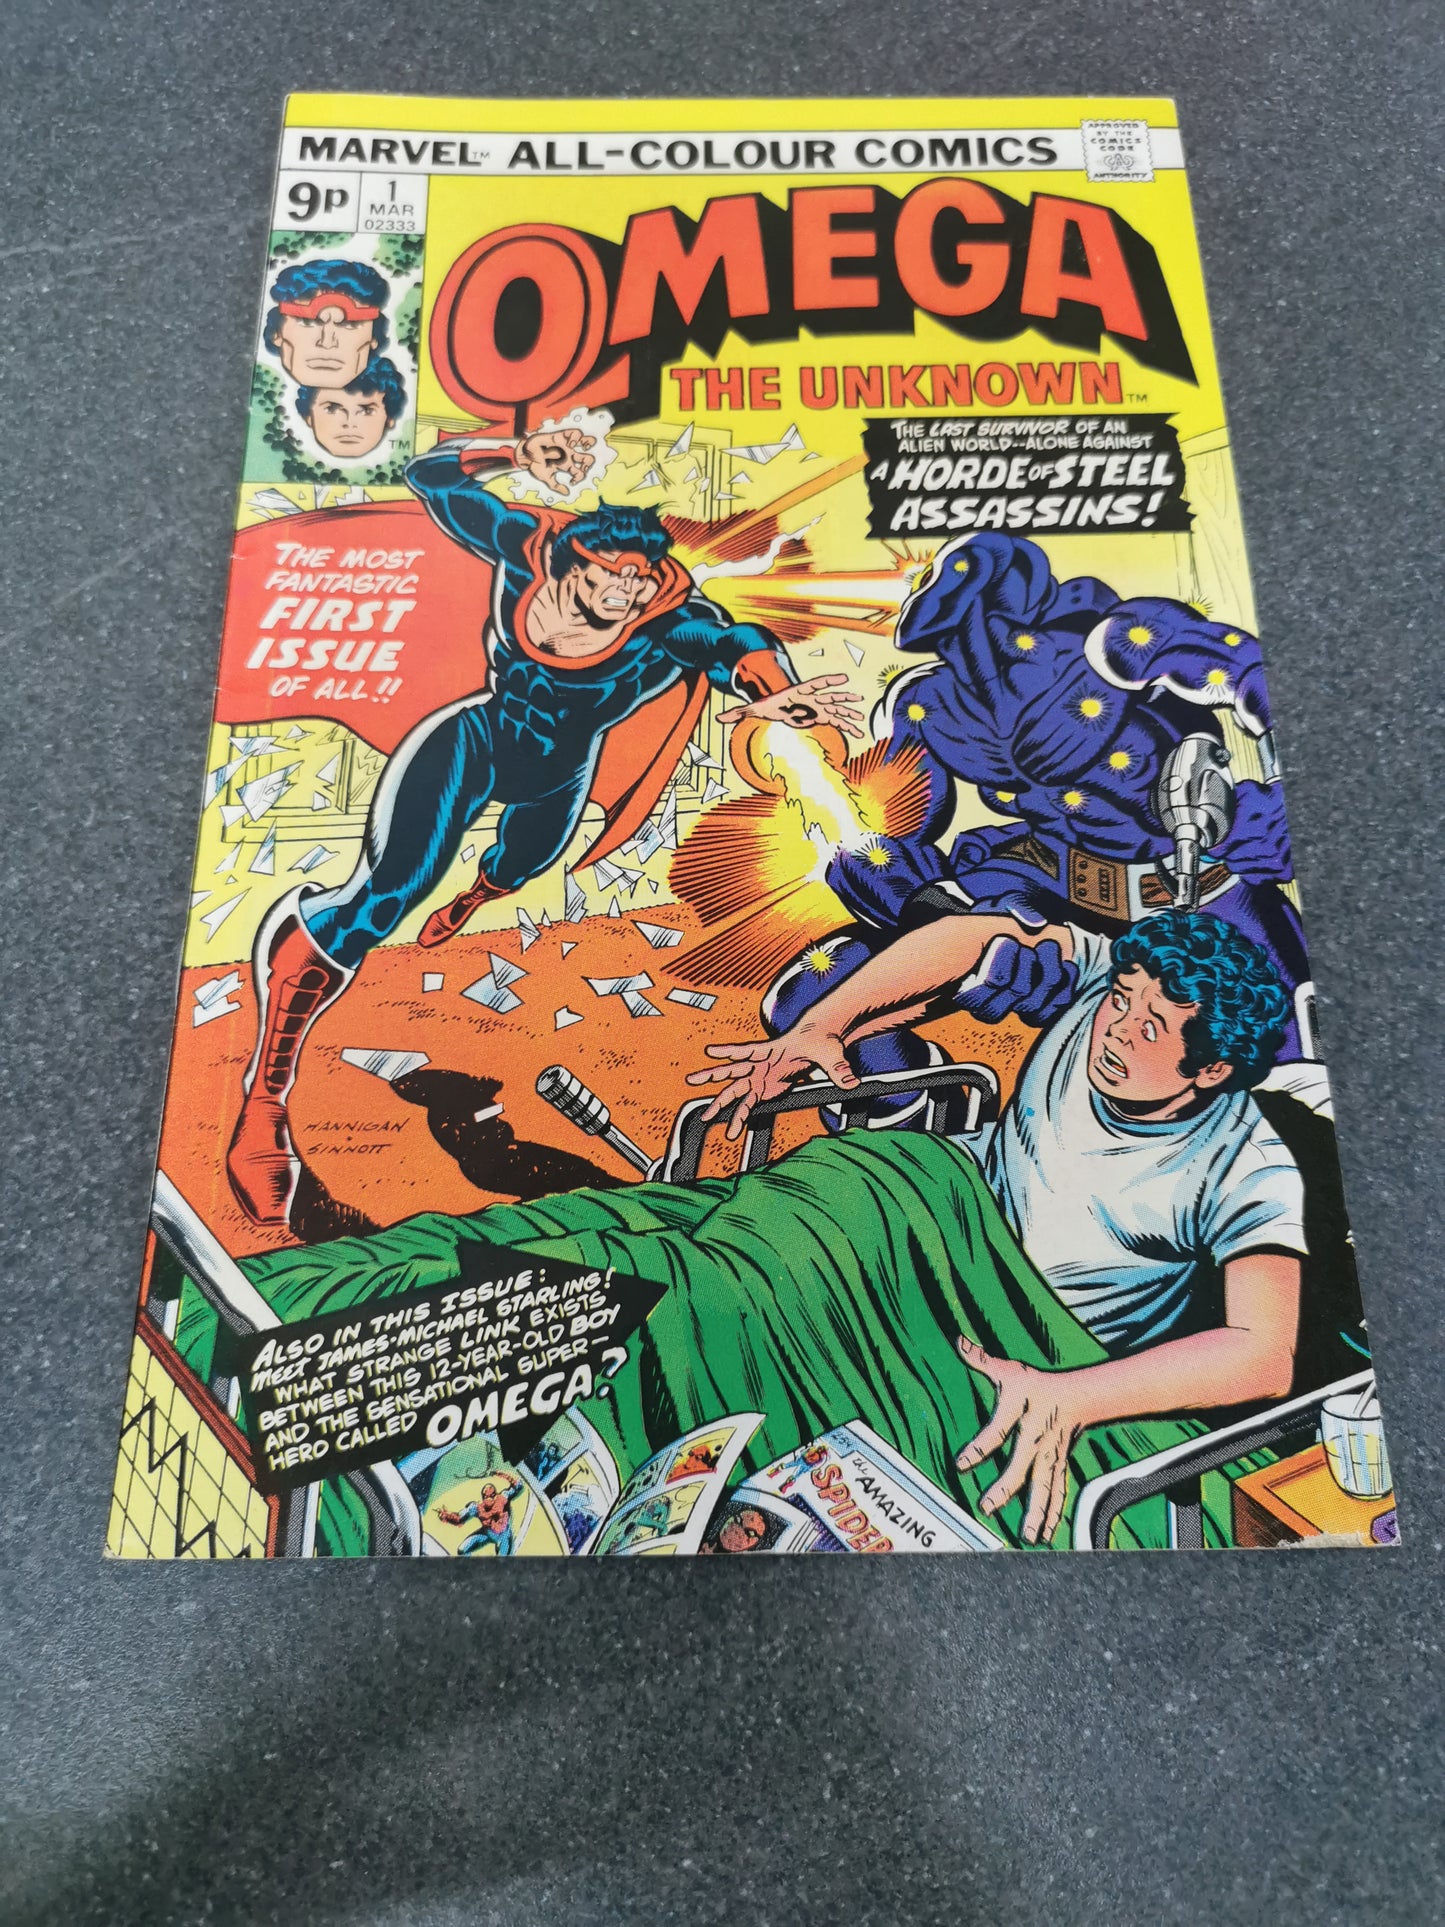 Omega The Unknown #1 1976 1st appearance of Omega Marvel comic